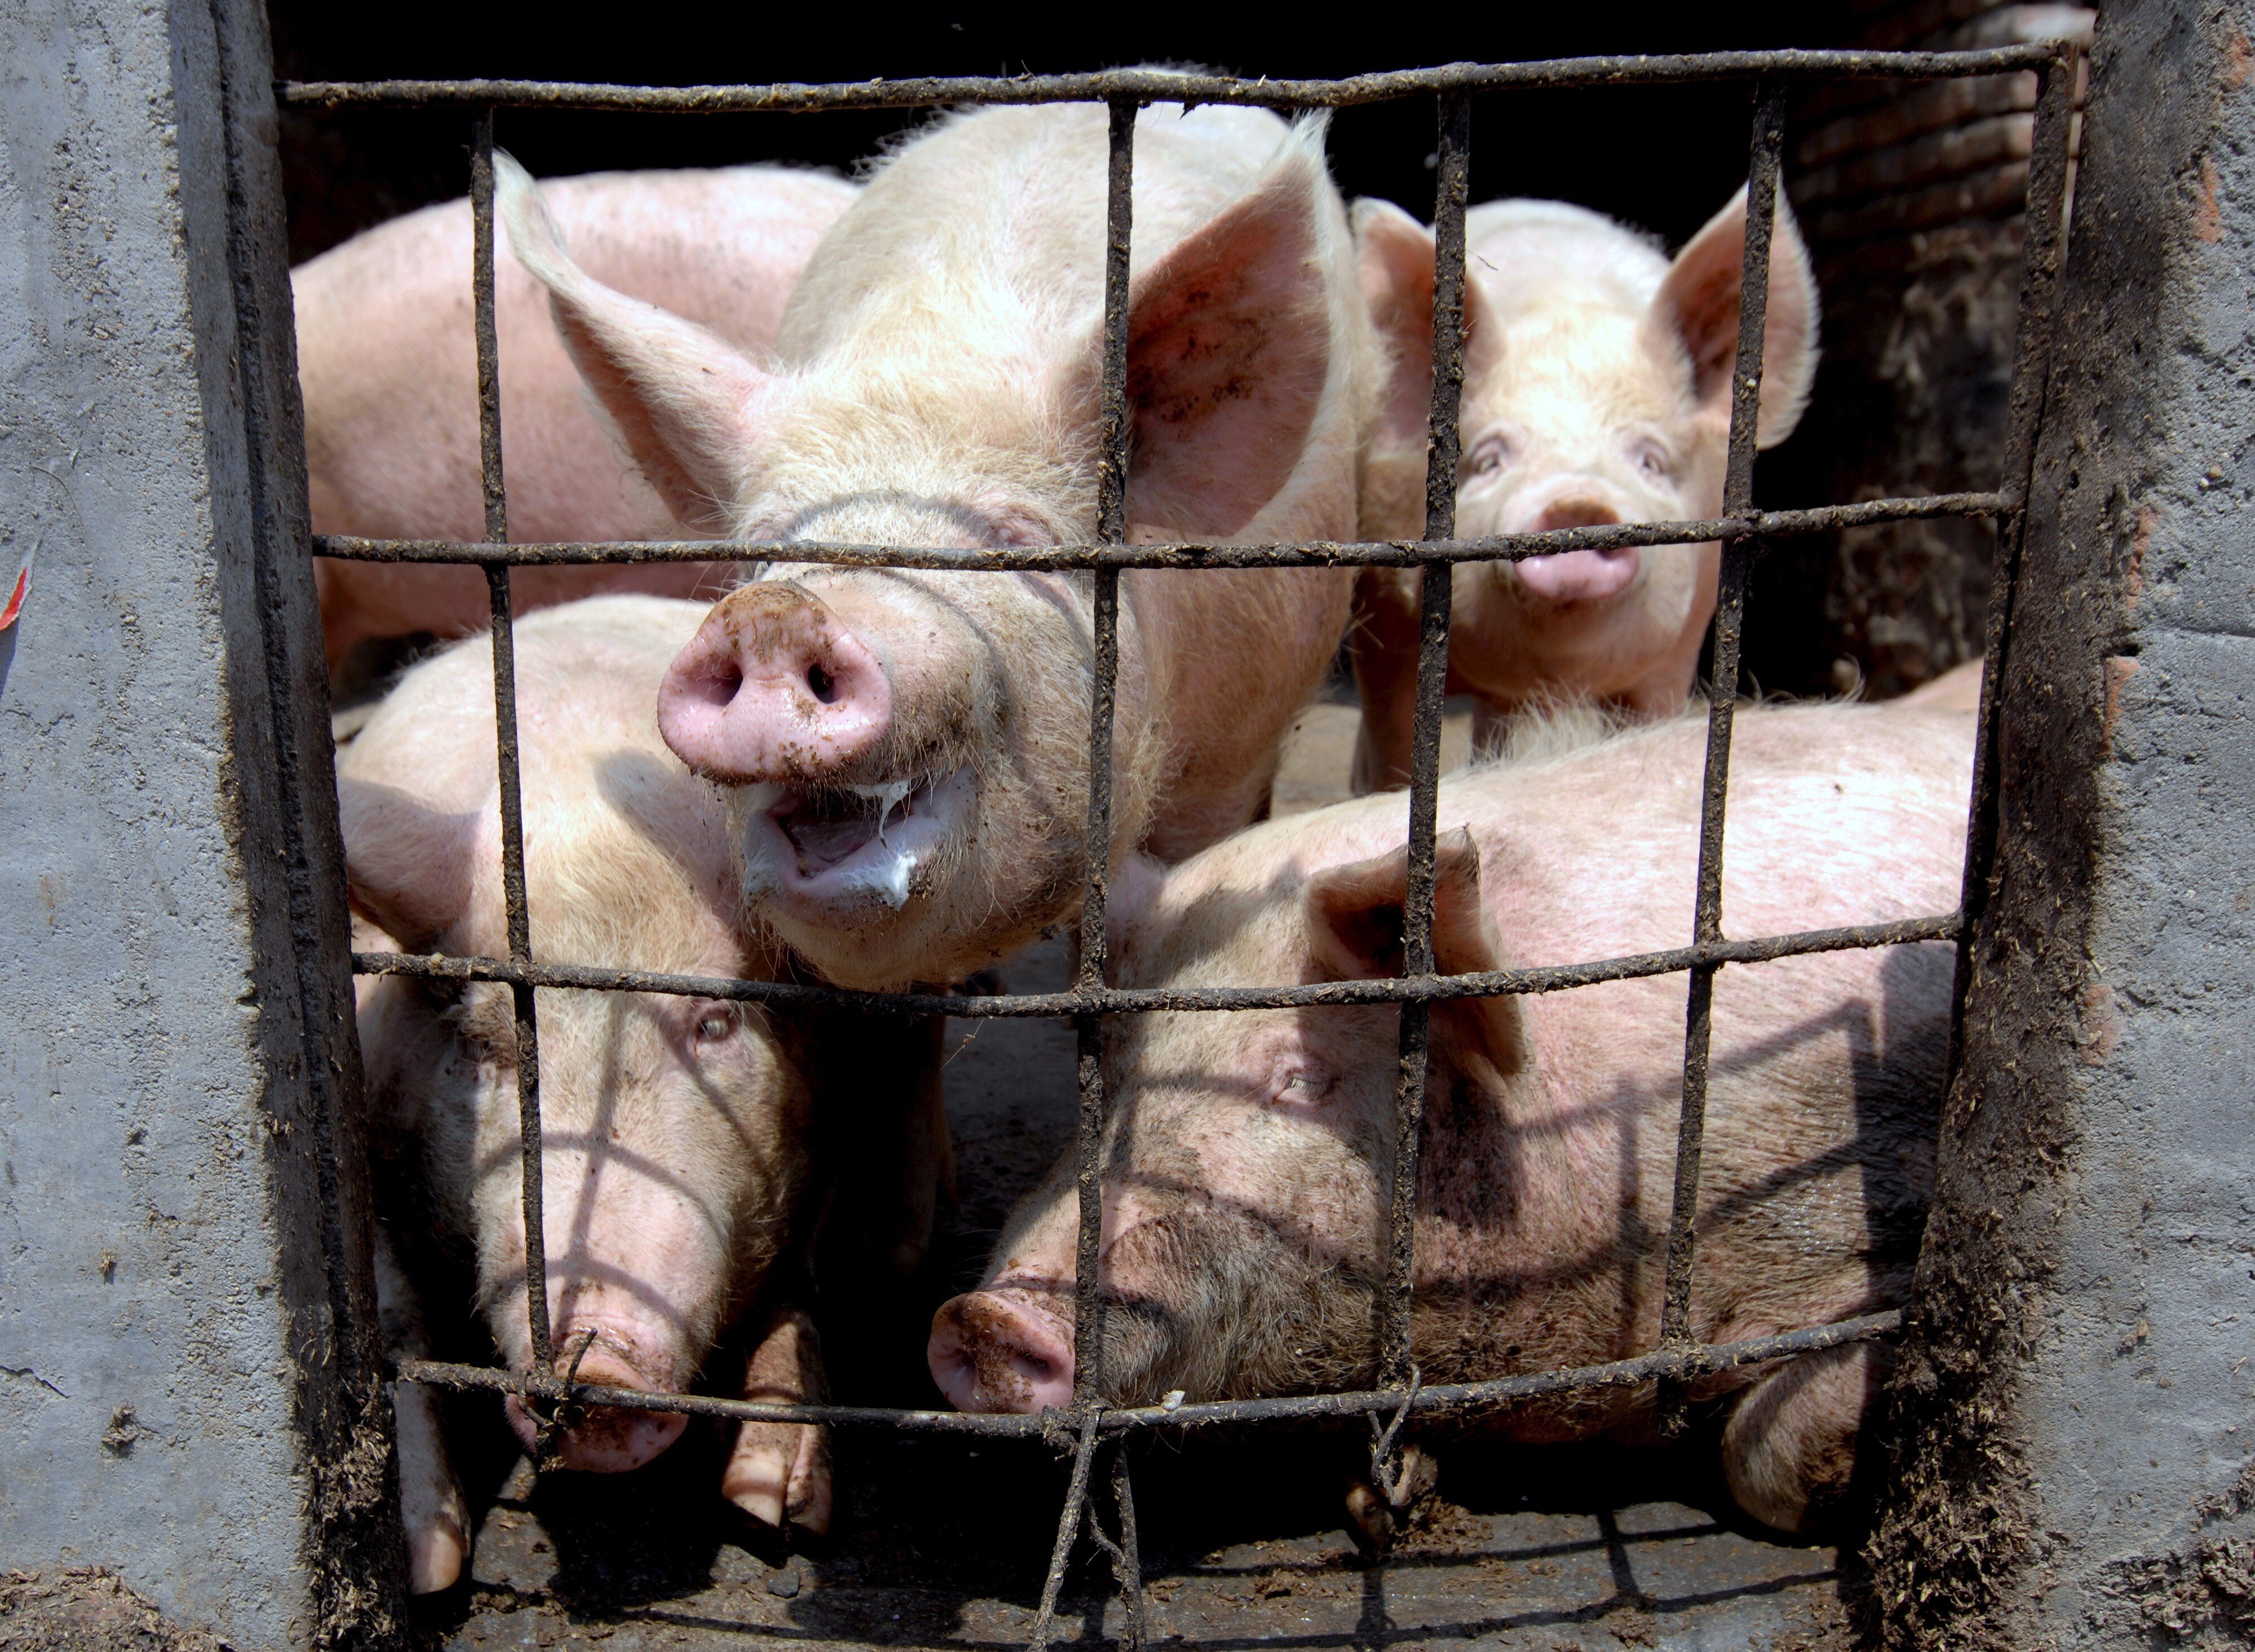 Chinese researchers say they have found two mutations of African swine fever that are less virulent but highly transmissible. Photo: EPA-EFE